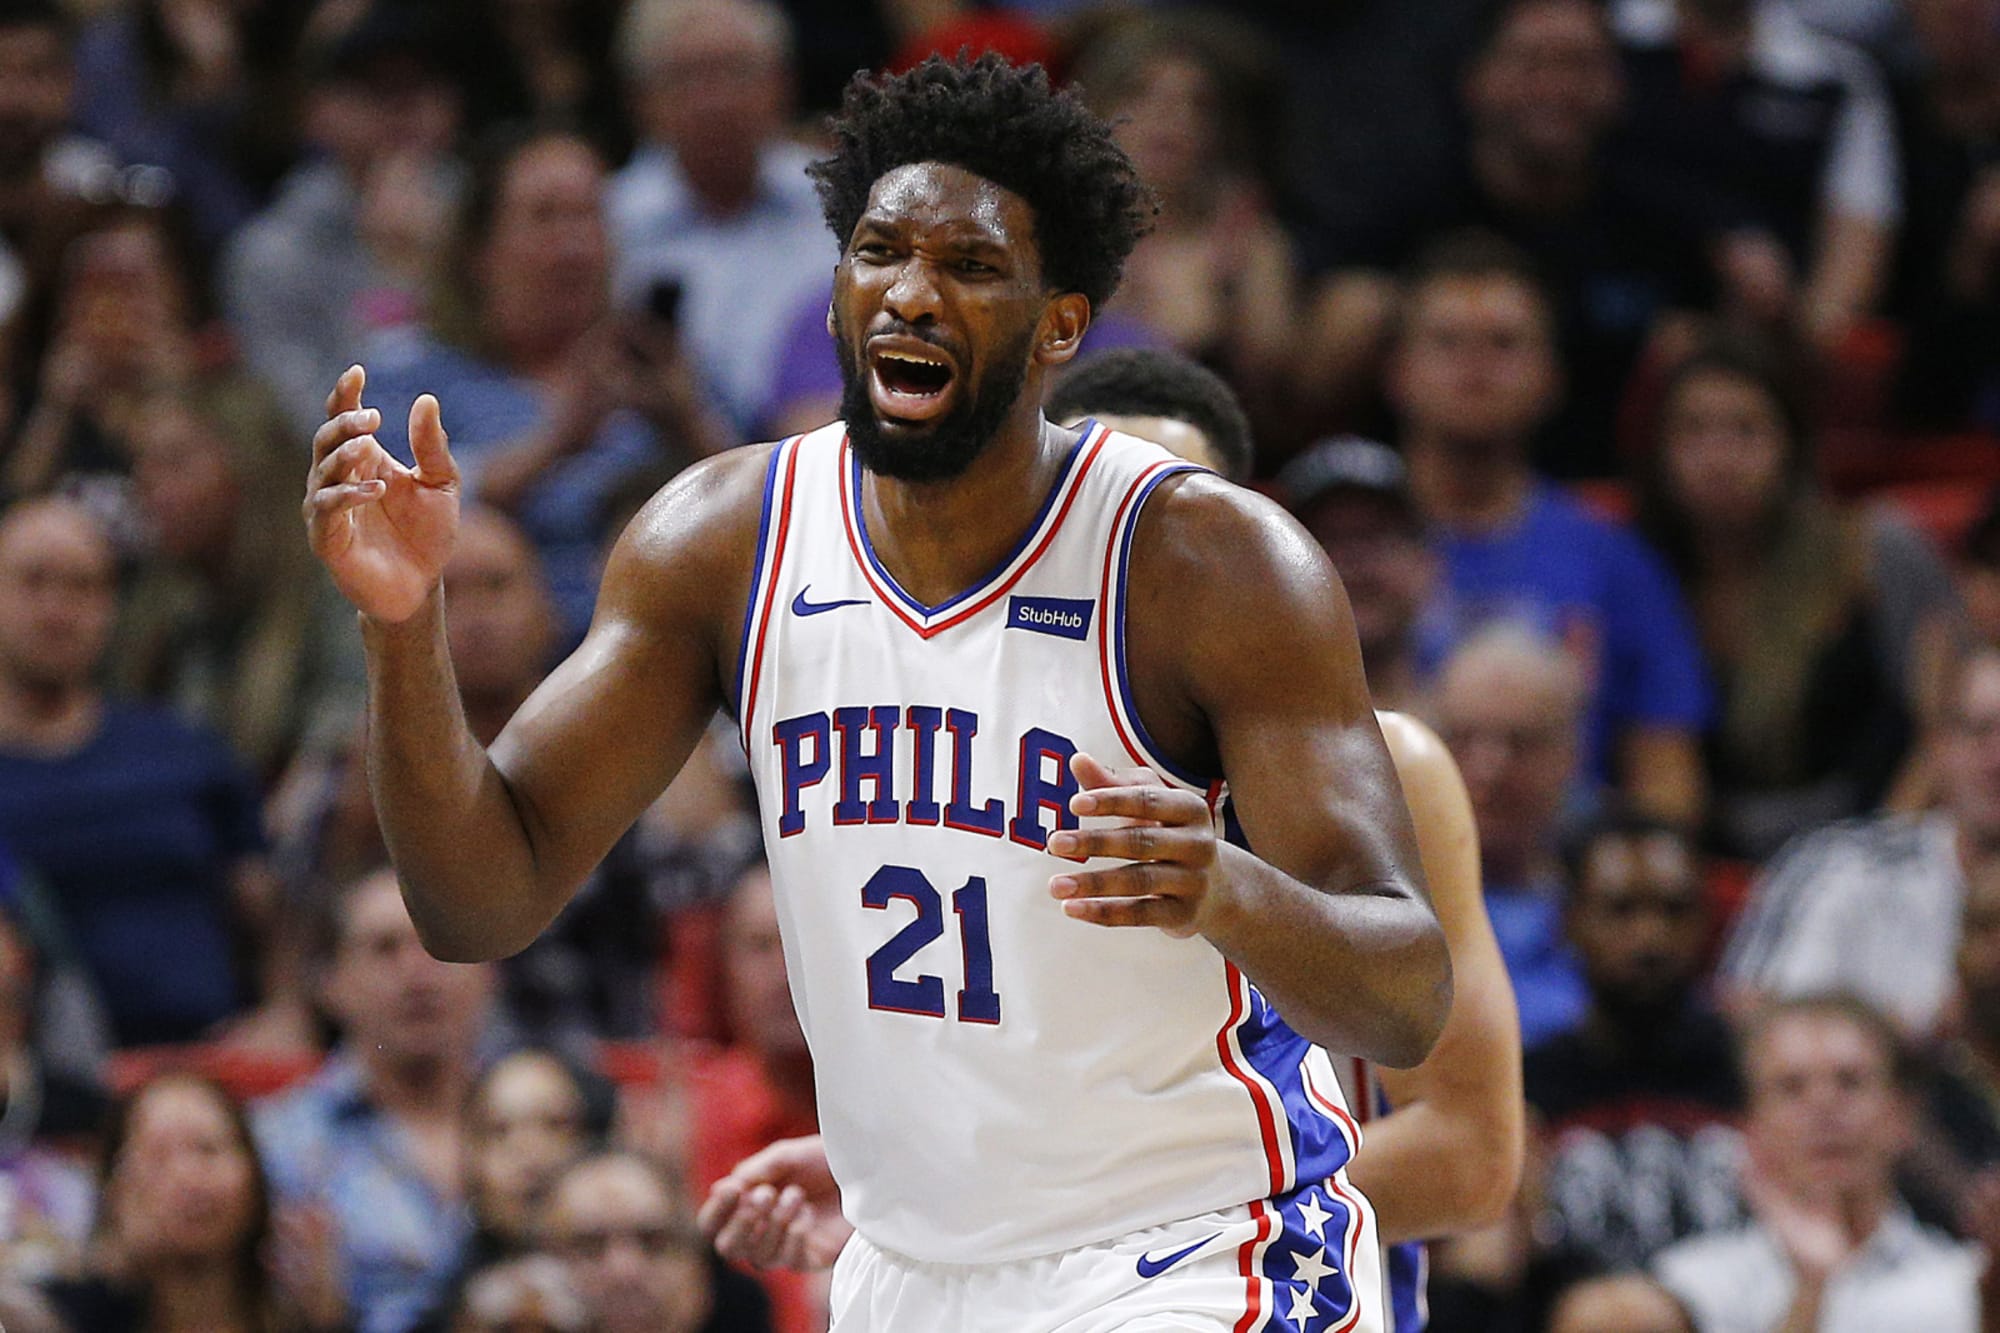 Philadelphia 76ers: Why they have failed expectations in 2019-20